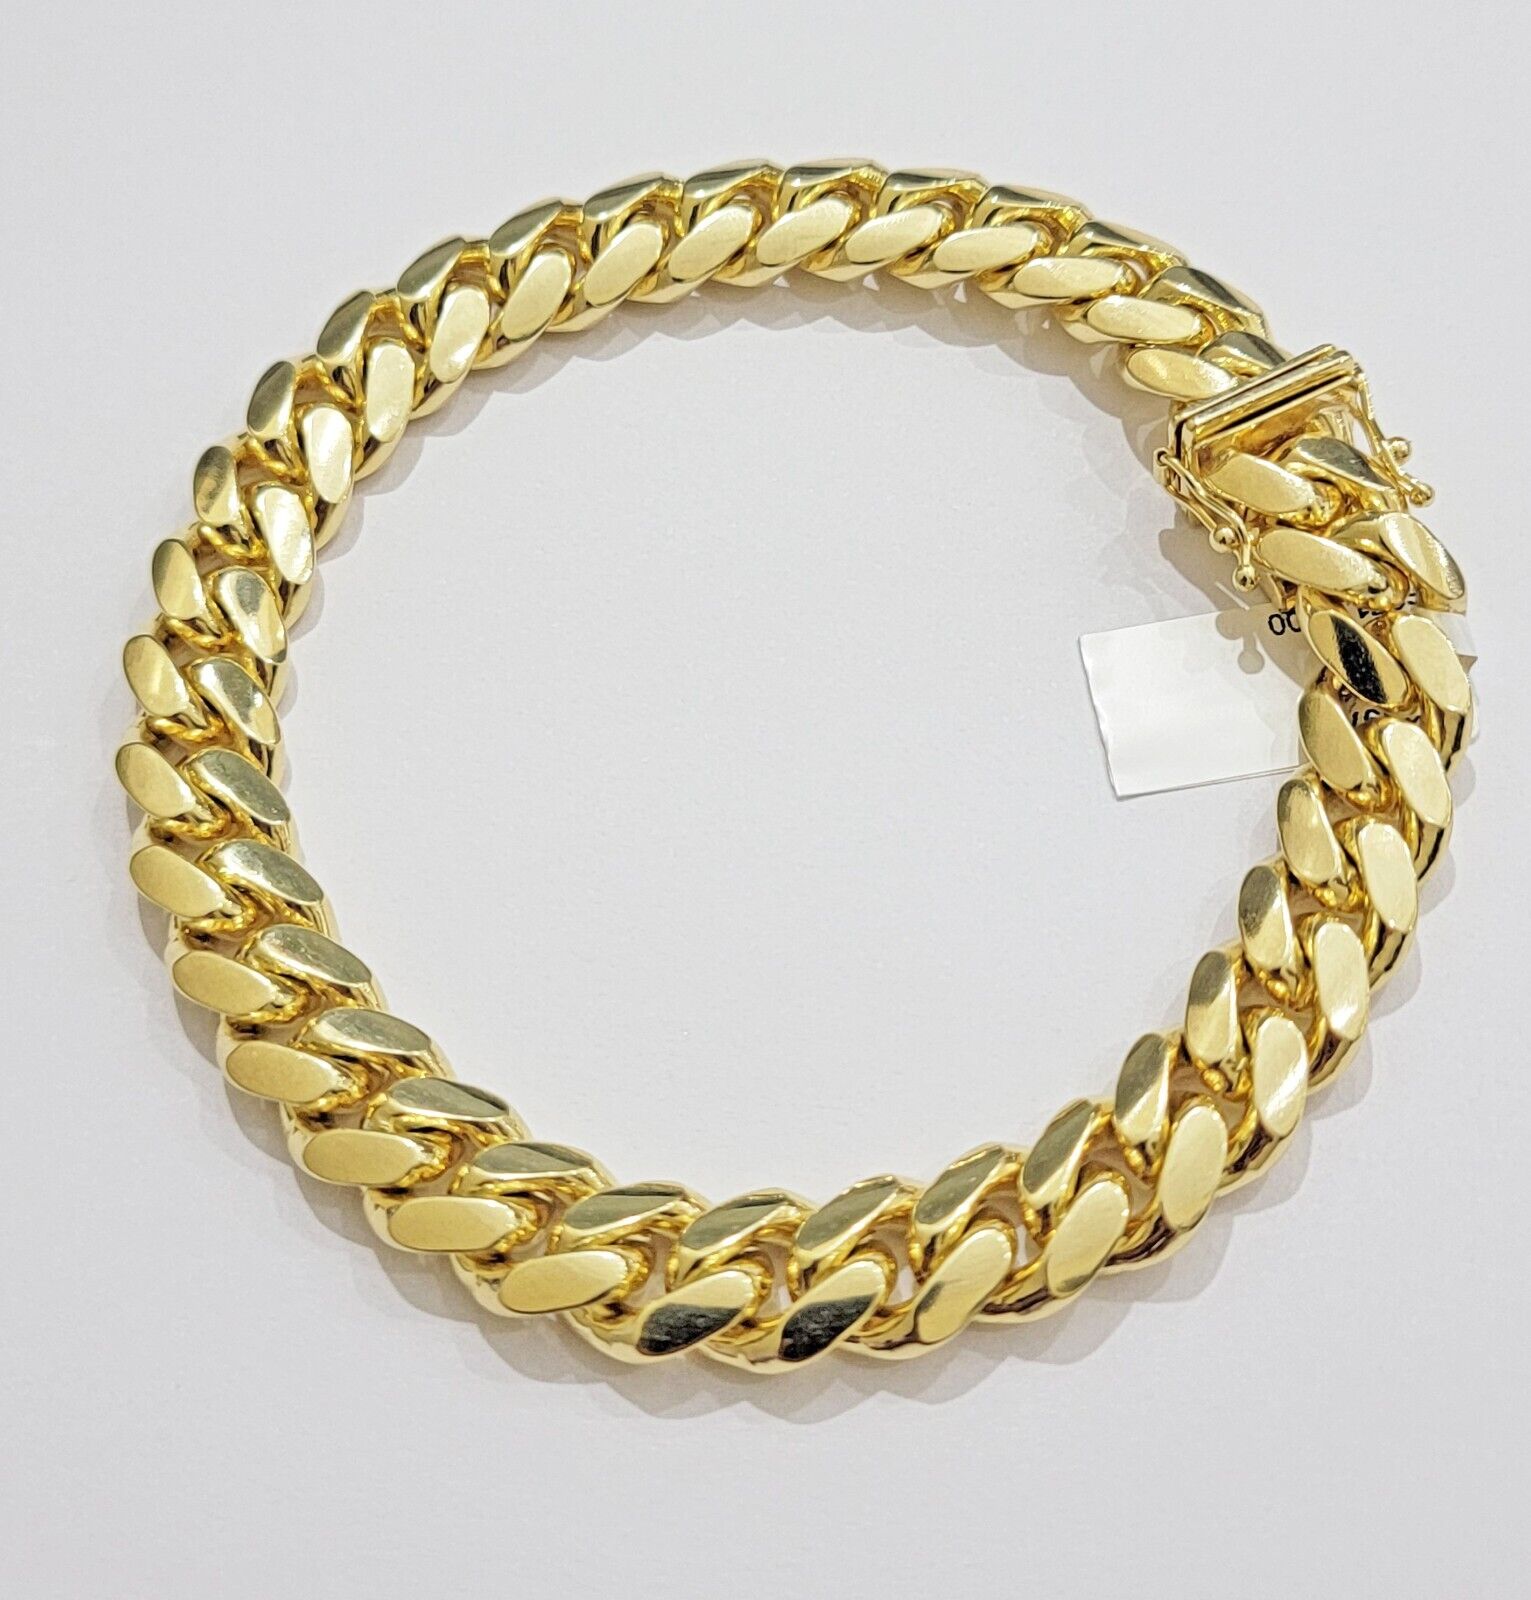 Real 14k Yellow Gold Solid 10mm Bracelet Miami Cuban Link 7.5